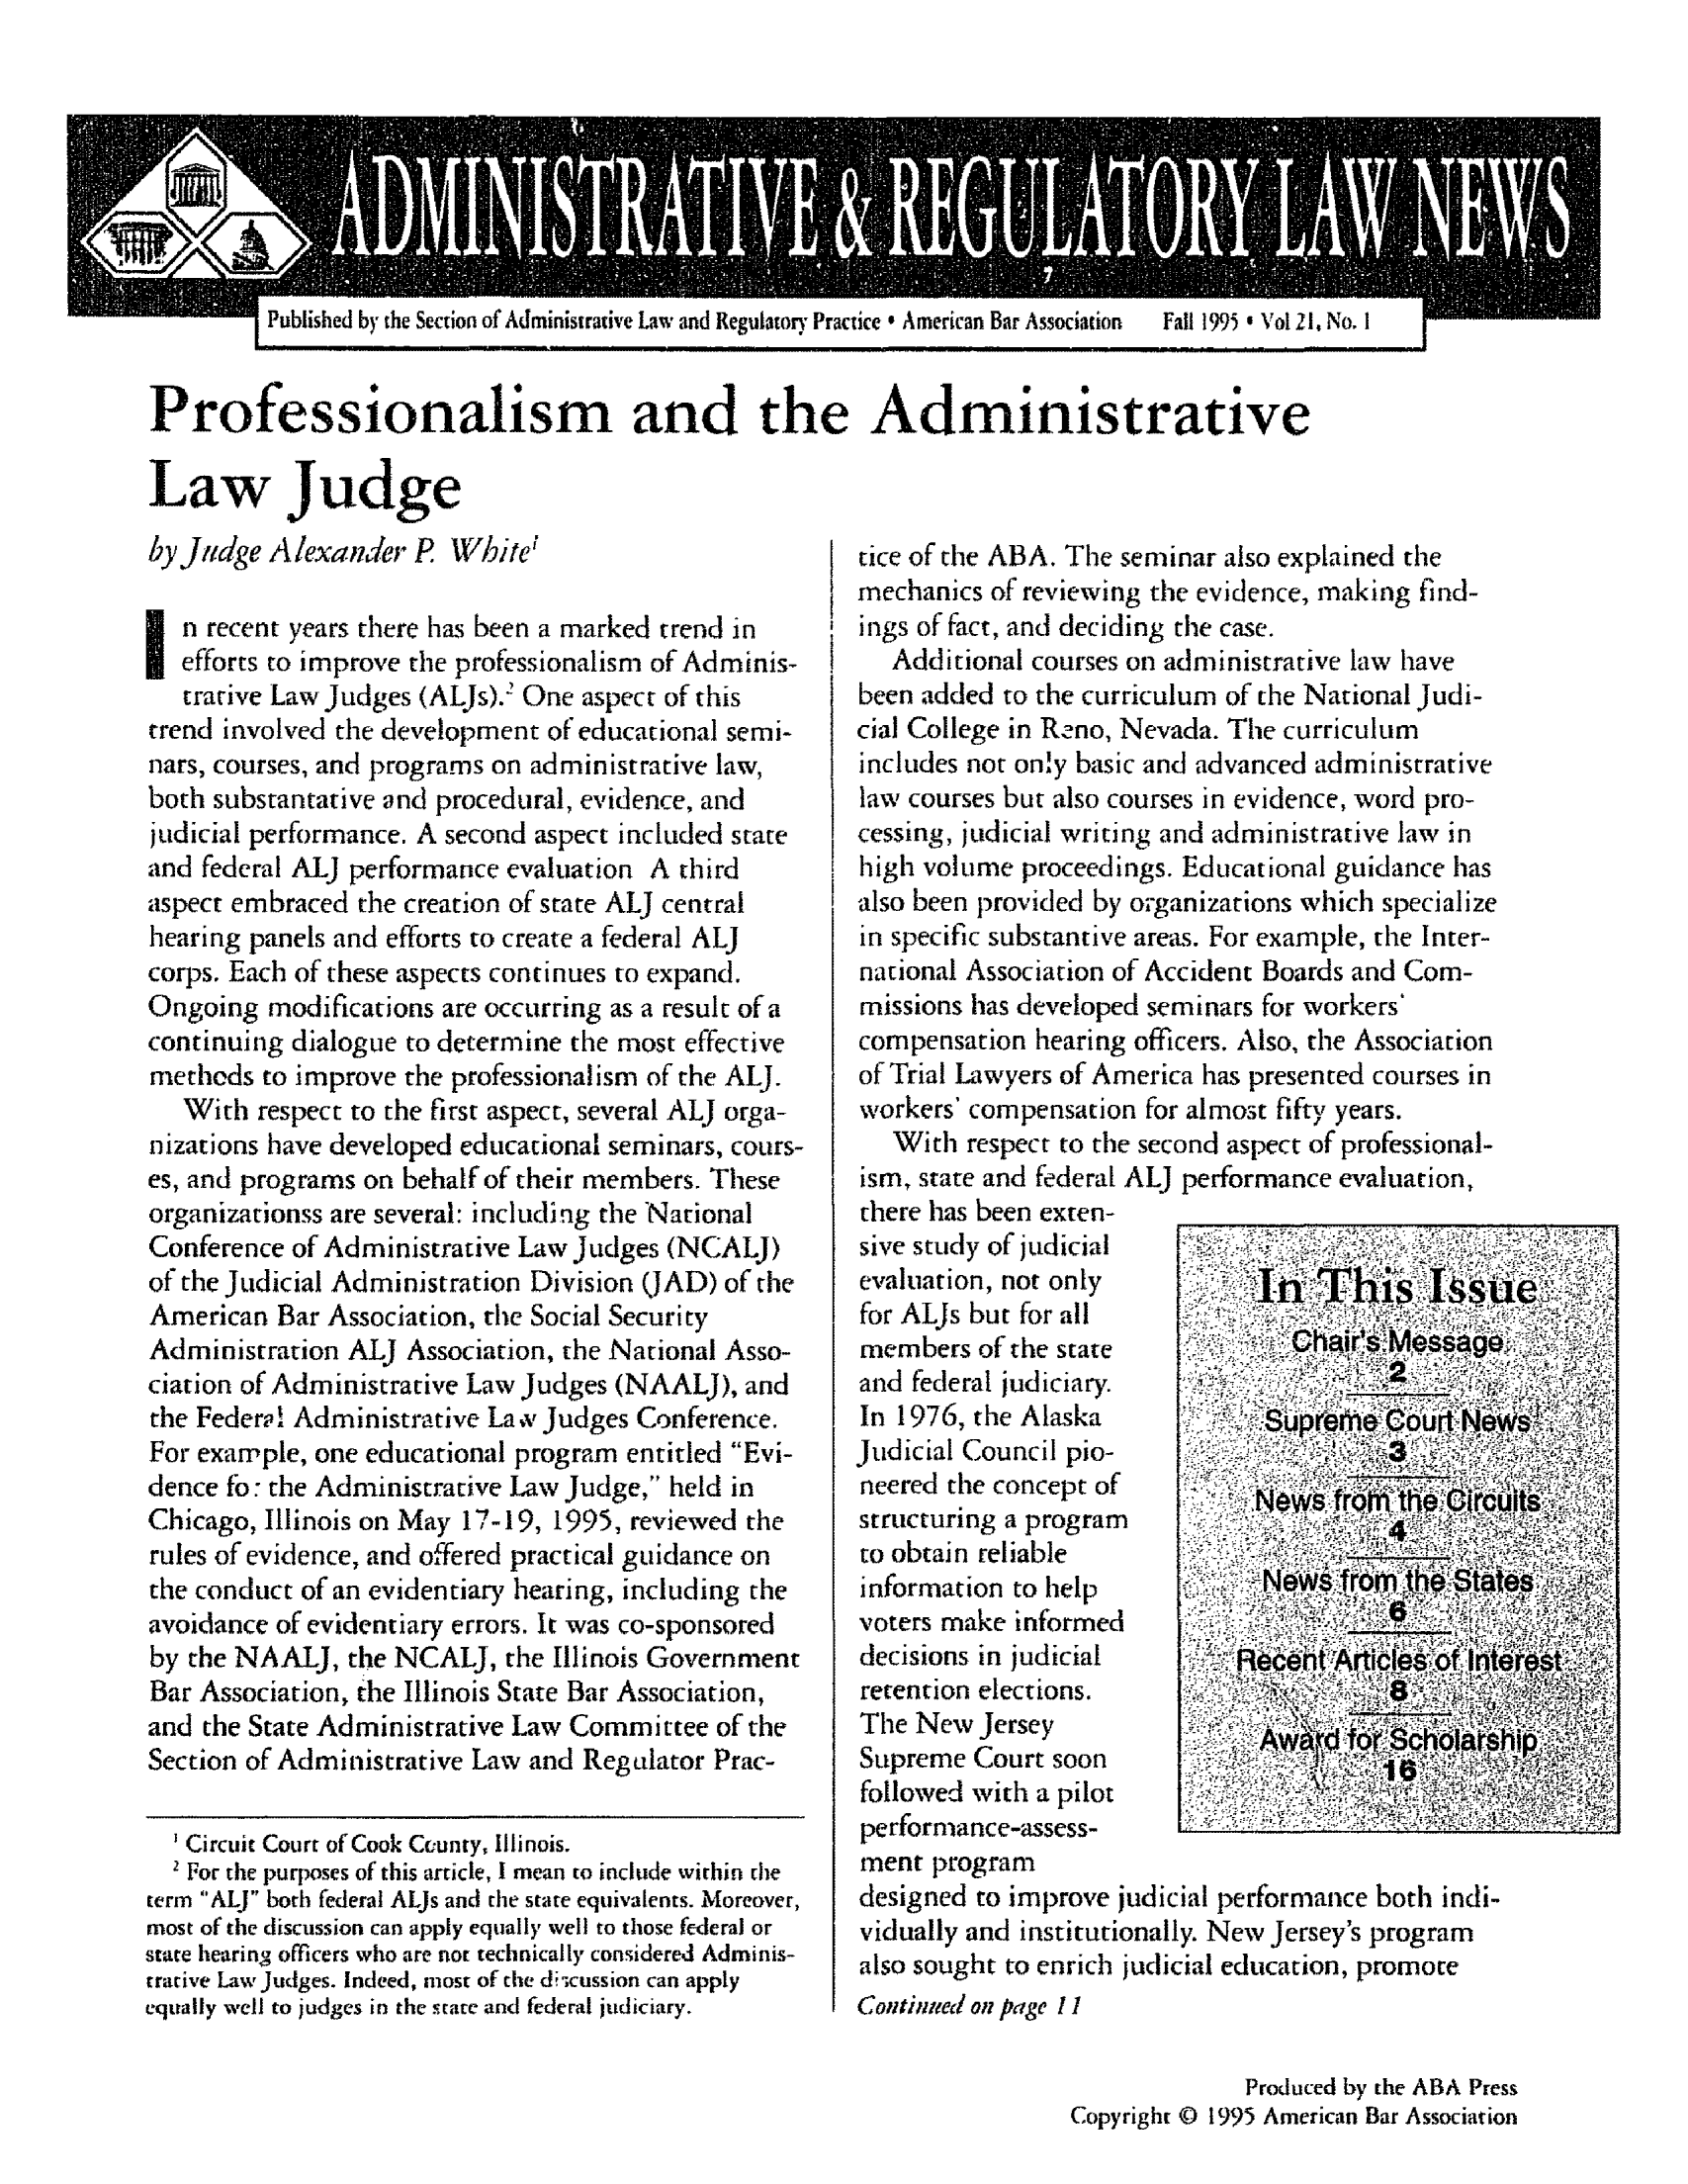 handle is hein.journals/admreln21 and id is 1 raw text is: Published by the Section of Administrative Law and Regulatory Practice  American Bar Association  Fall 1995' Vol 2 1, No. I

Professionalism and the Administrative

Law Judge
by Judge Alexander P White'
n recent years there has been a marked trend in
efforts to improve the professionalism of Adminis-
trative Law Judges (ALJs).2 One aspect of this
trend involved the development of educational semi-
nars, courses, and programs on administrative law,
both substantative and procedural, evidence, and
judicial performance. A second aspect included state
and federal ALJ performance evaluation A third
aspect embraced the creation of state ALJ central
hearing panels and efforts to create a federal ALJ
corps. Each of these -aspects continues to expand.
Ongoing modifications are occurring as a result of a
continuing dialogue to determine the most effective
methods to improve the professionalism of the ALJ.
With respect to the first aspect, several ALJ orga-
nizations have developed educational seminars, cours-
es, and programs on behalf of their members. These
organizationss are several: including the National
Conference of Administrative Law Judges (NCALJ)
of the Judicial Administration Division (JAD) of the
American Bar Association, the Social Security
Administration ALJ Association, the National Asso-
ciation of Administrative Law Judges (NAALJ), and
the Federa! Administrative La v Judges Conference.
For example, one educational program entitled Evi-
dence fo: the Administrative Law Judge, held in
Chicago, Illinois on May 17-19, 1995, reviewed the
rules of evidence, and offered practical guidance on
the conduct of an evidentiary hearing, including the
avoidance of evidentiary errors. It was co-sponsored
by the NAALJ, the NCALJ, the Illinois Government
Bar Association, the Illinois State Bar Association,
and the State Administrative Law Committee of the
Section of Administrative Law and Regulator Prac-
Circuit Court of Cook County, Illinois.
2 For the purposes of this article, I mean to include within the
term ALJ both federal ALJs and the state equivalents. Moreover,
most of the discussion can apply equally ell to those federal or
state hearinsg officers who are not technically considered Adminis-
trative Law Judges. Indeed, most of the discussion can apply
equally well to judges in the stare and federal judiciary.

tice of the ABA. The seminar also explained the
mechanics of reviewing the evidence, making find-
ings of fact, and deciding the case.
Additional courses on administrative law have
been added to the curriculum of the National Judi-
cial College in Reno, Nevada. The curriculum
includes not only basic and advanced administrative
law courses but also courses in evidence, word pro-
cessing, judicial writing and administrative law in
high volume proceedings. Educational guidance has
also been provided by organizations which specialize
in specific substantive areas. For example, the Inter-
national Association of Accident Boards and Com-
missions has developed seminars for workers'
compensation hearing officers. Also, the Association
of Trial Lawyers of America has presented courses in
workers' compensation for almost fifty years.
With respect to the second aspect of professional-
ism, state and federal ALJ performance evaluation,
there has been exten-
sive study of judicial
evaluation, not only
for ALJs but for all
members of the state
and federal judiciary.
In 1976, the Alaska                 M
Judicial Council pio-                   3
neered the concept of
structuring a program
to obtain reliable
information to help            N     rom.teSAe        k
voters make informed
decisions in judicial        Ro
retention elections.
The New Jersey
Supreme Court soon              W
followed with a pilot
performance-assess-
ment program
designed to improve judicial performance both indi-
vidually and institutionally. New Jersey's program
also sought to enrich judicial education, promote
Continued/ on pRage 1
Produced by the ABA Press
Copyright © 1995 American Bar Association


